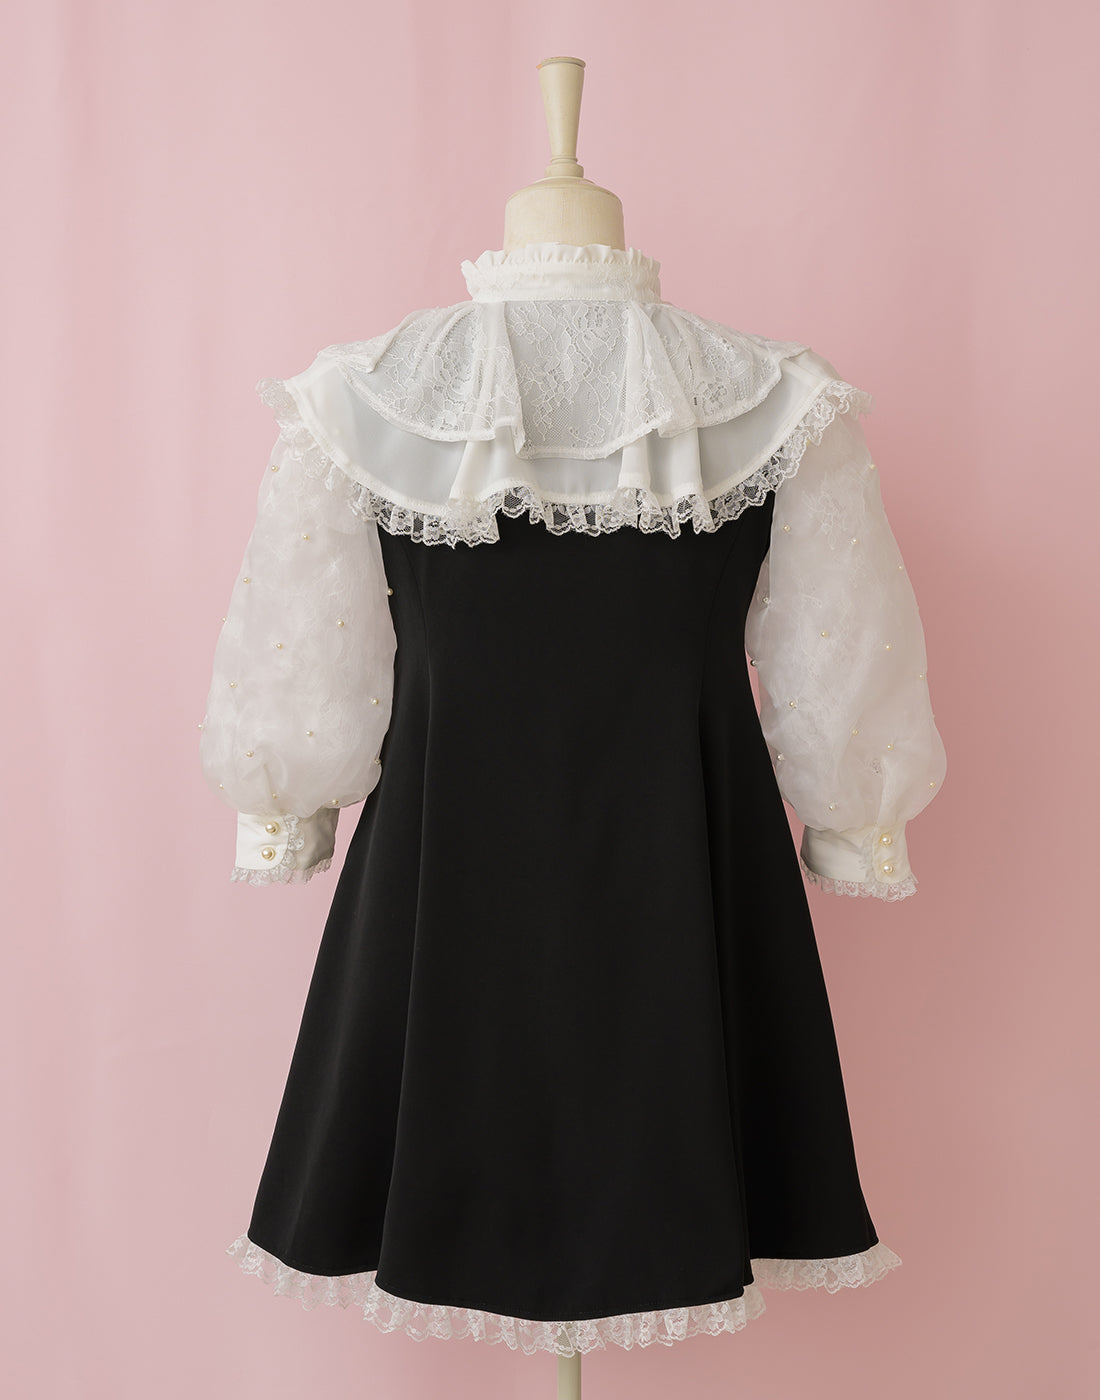 Lacy millefeuille frill collar ワンピース – mellfy memory